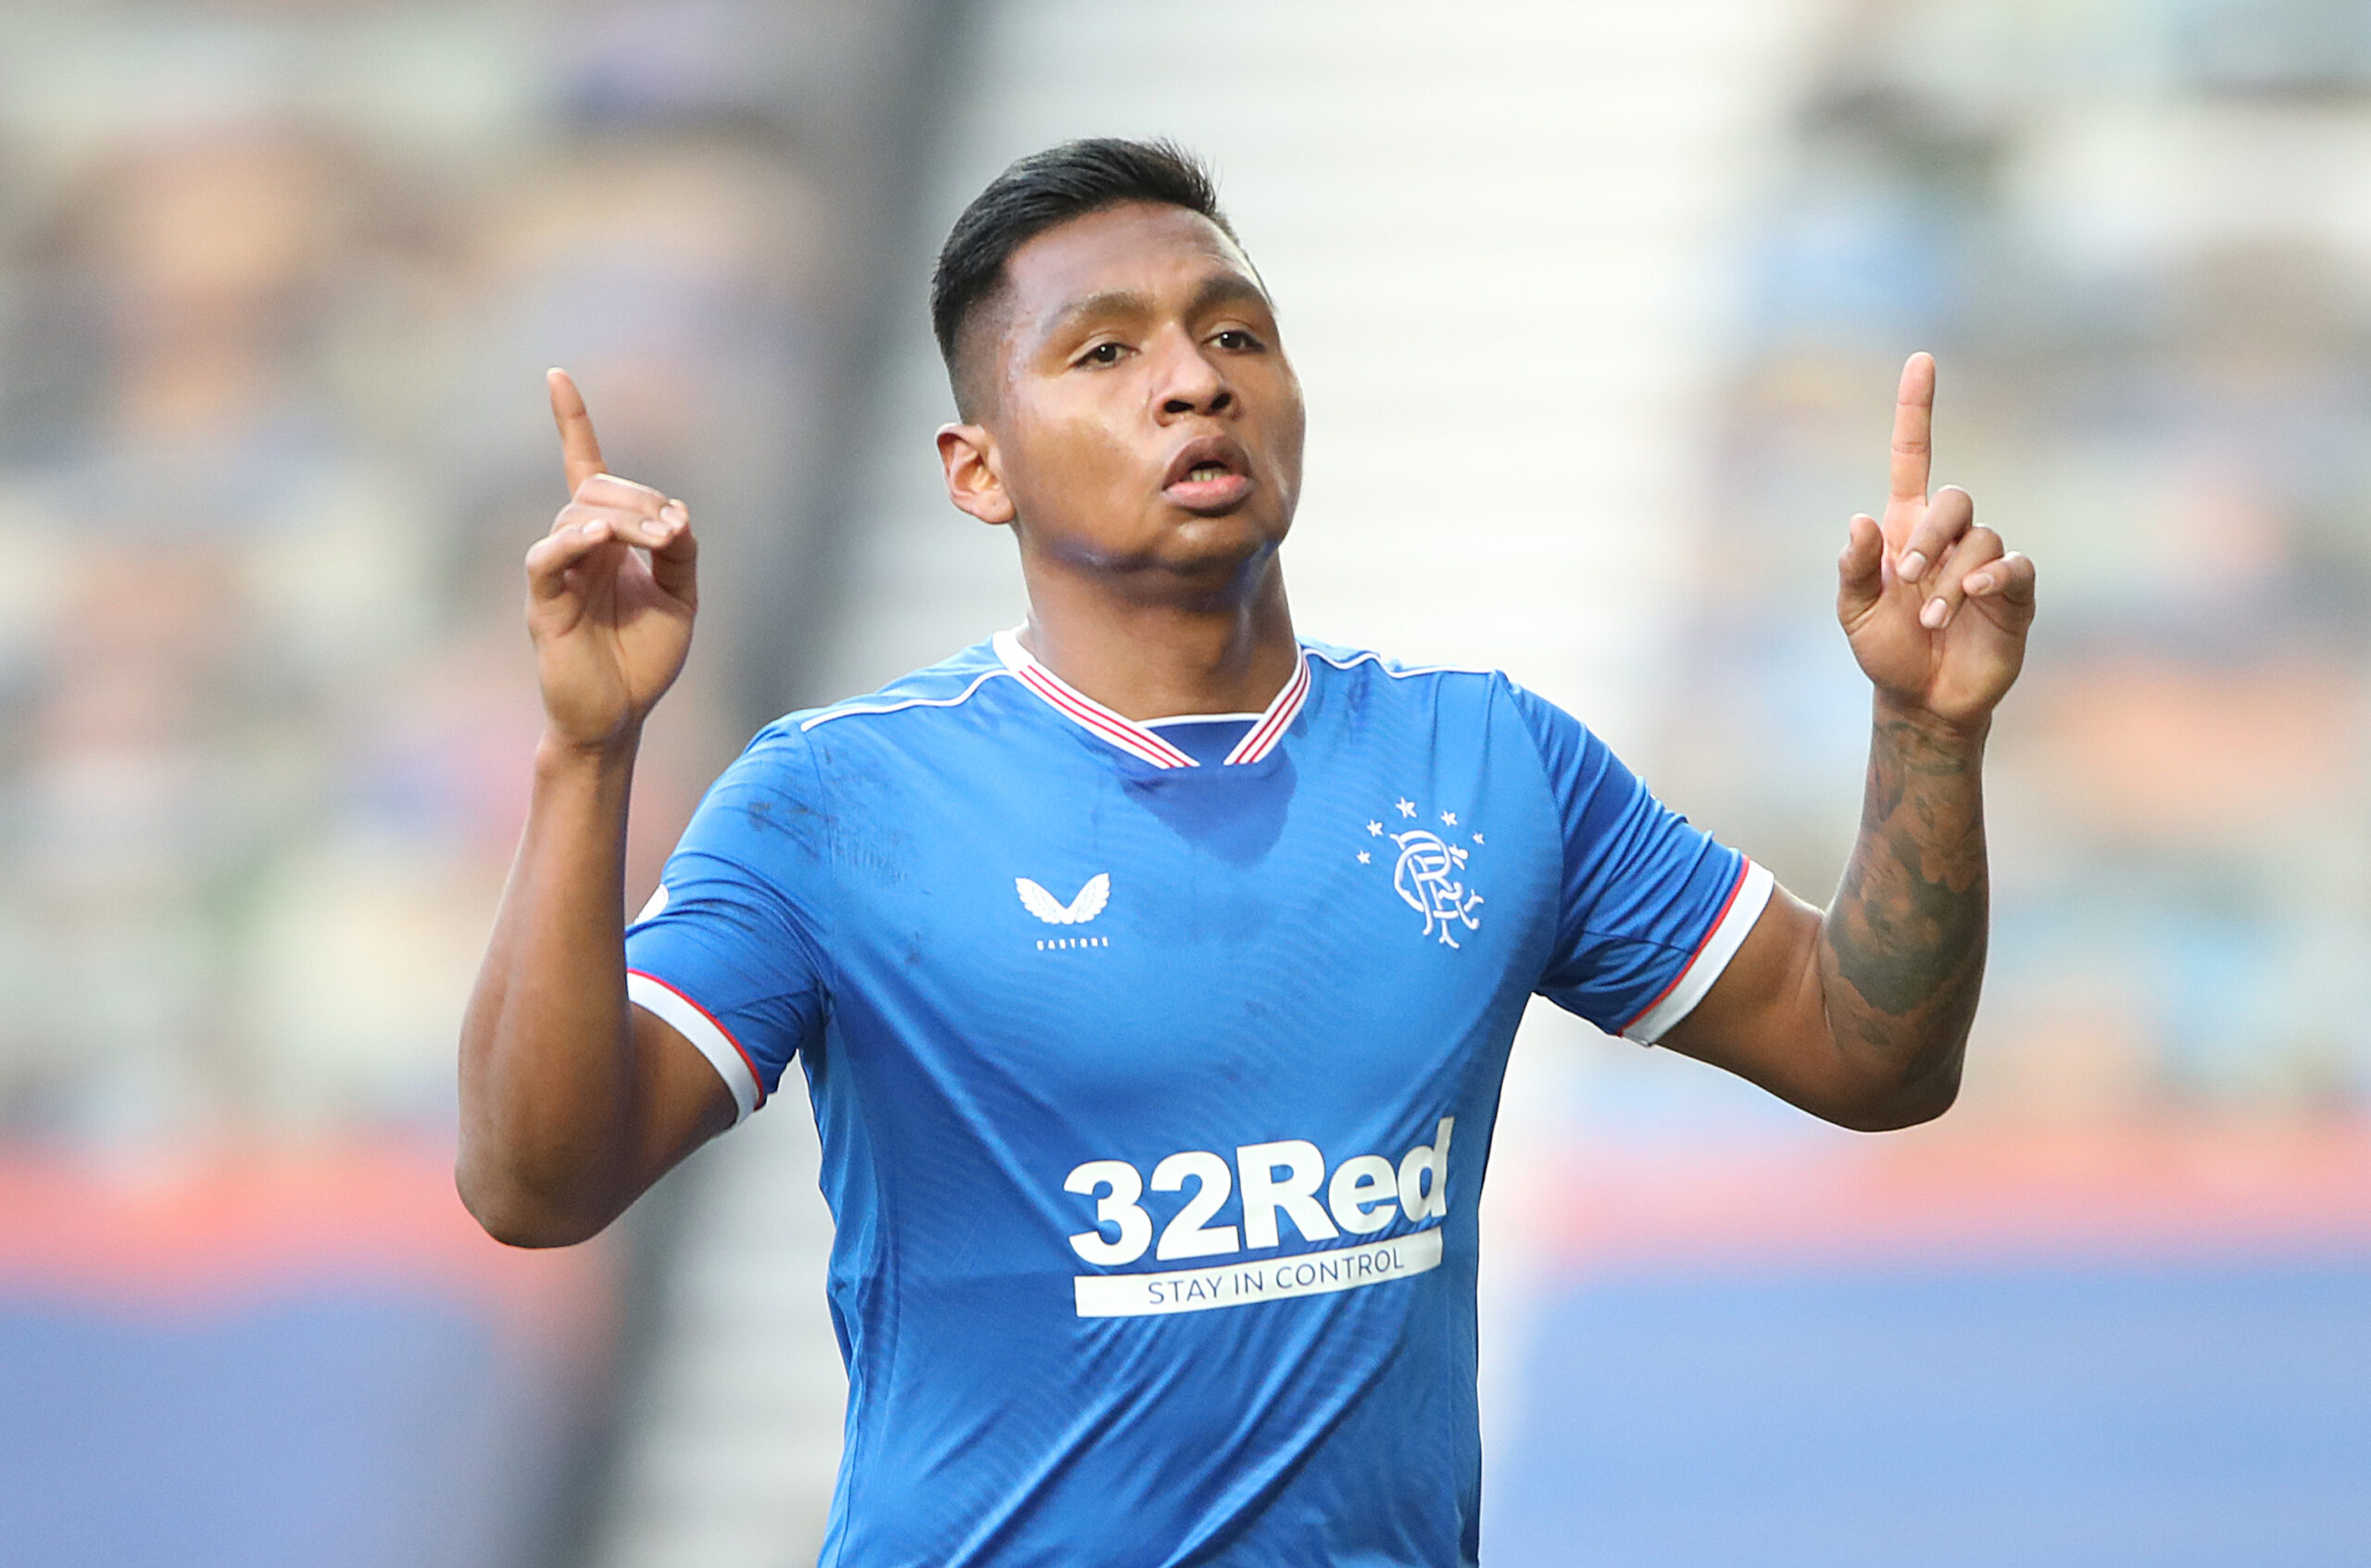 Exclusive: “Made up” – the truth about Morelos’ transfer to Porto